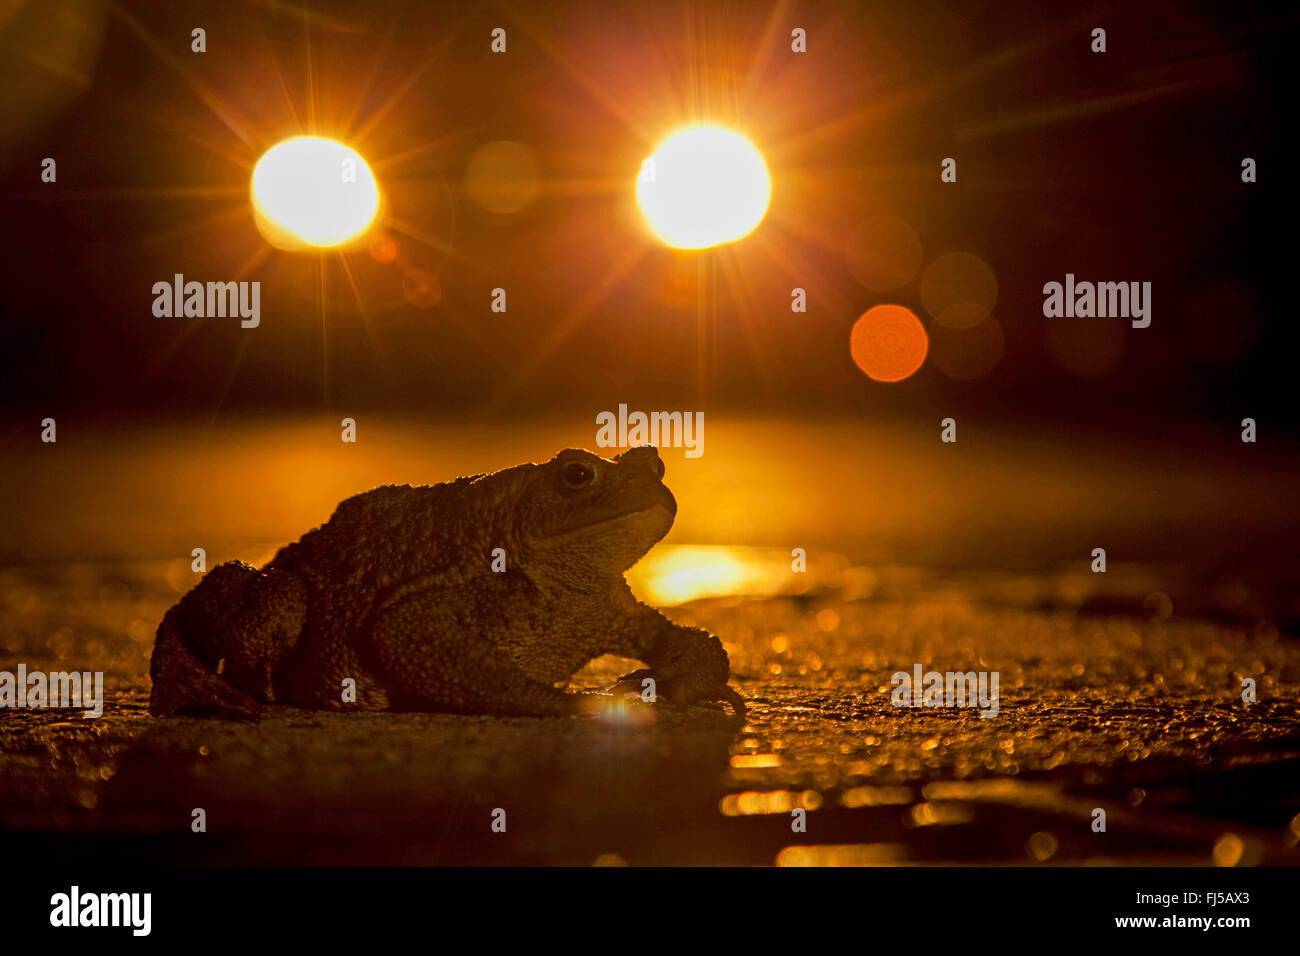 European common toad (Bufo bufo), toad on a road at night with a car, Germany, Rhineland-Palatinate Stock Photo